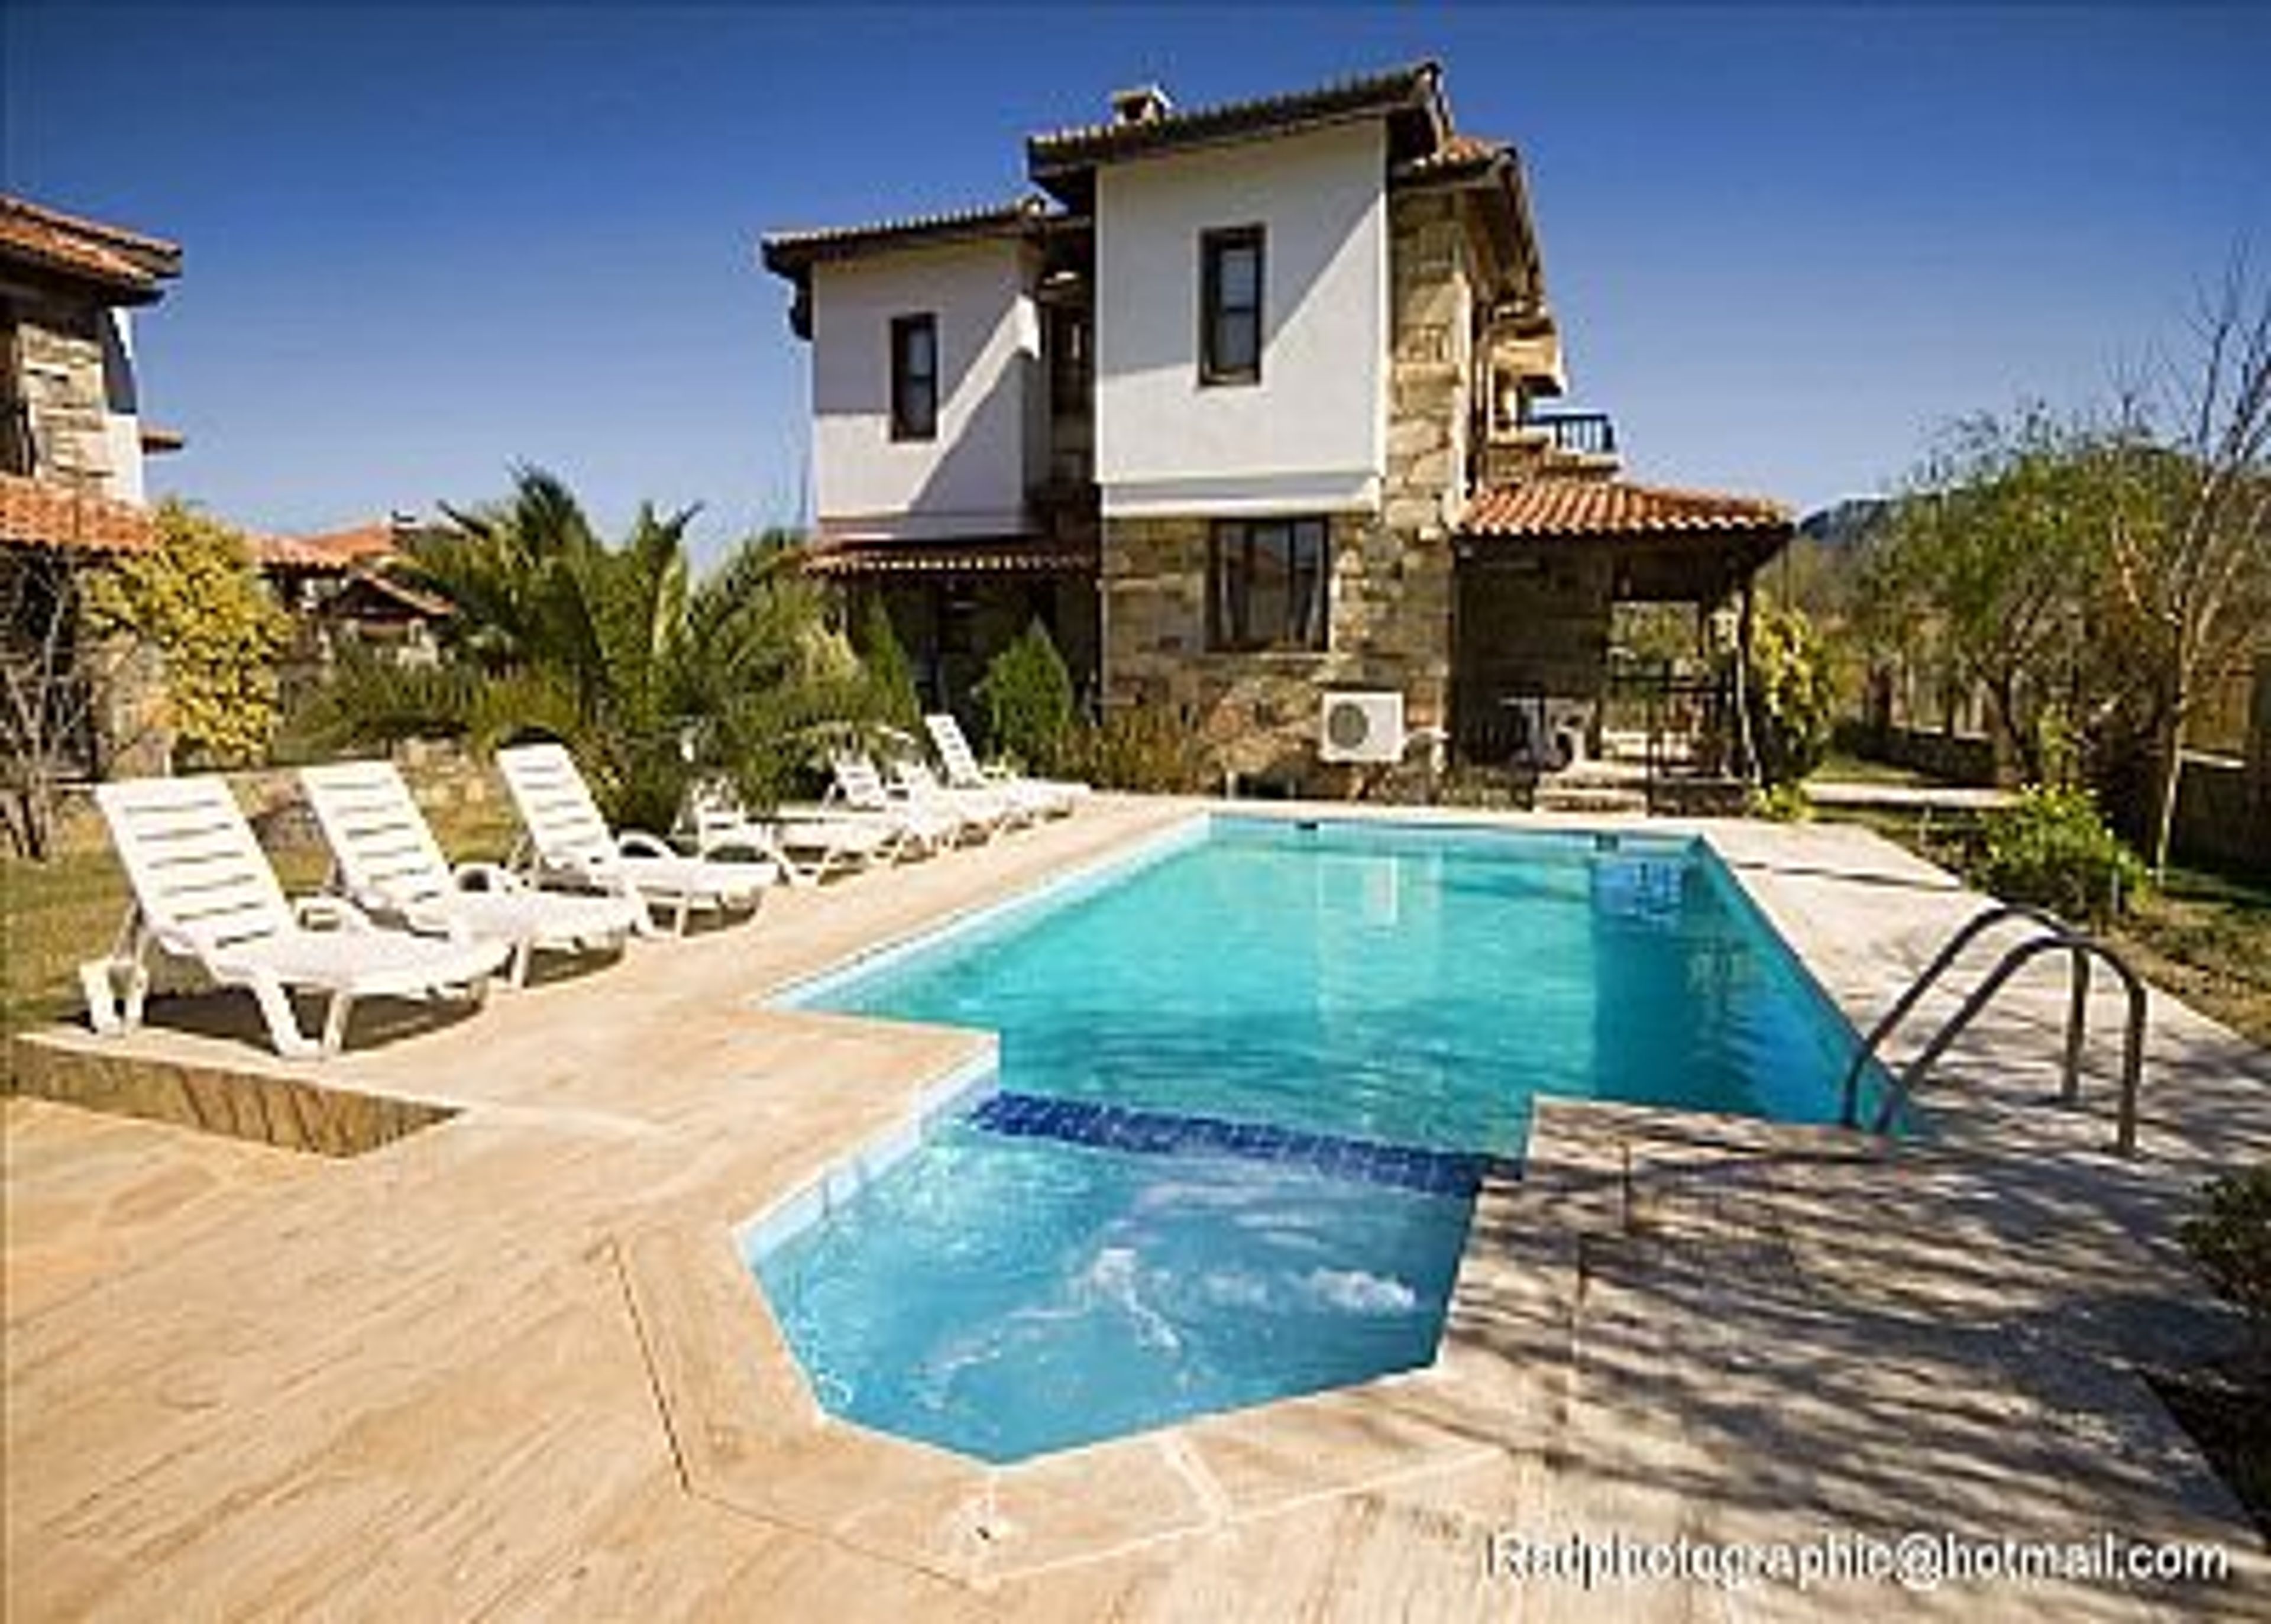  Private Pool. ,Large Garden Super south facing pool, Mountain views 